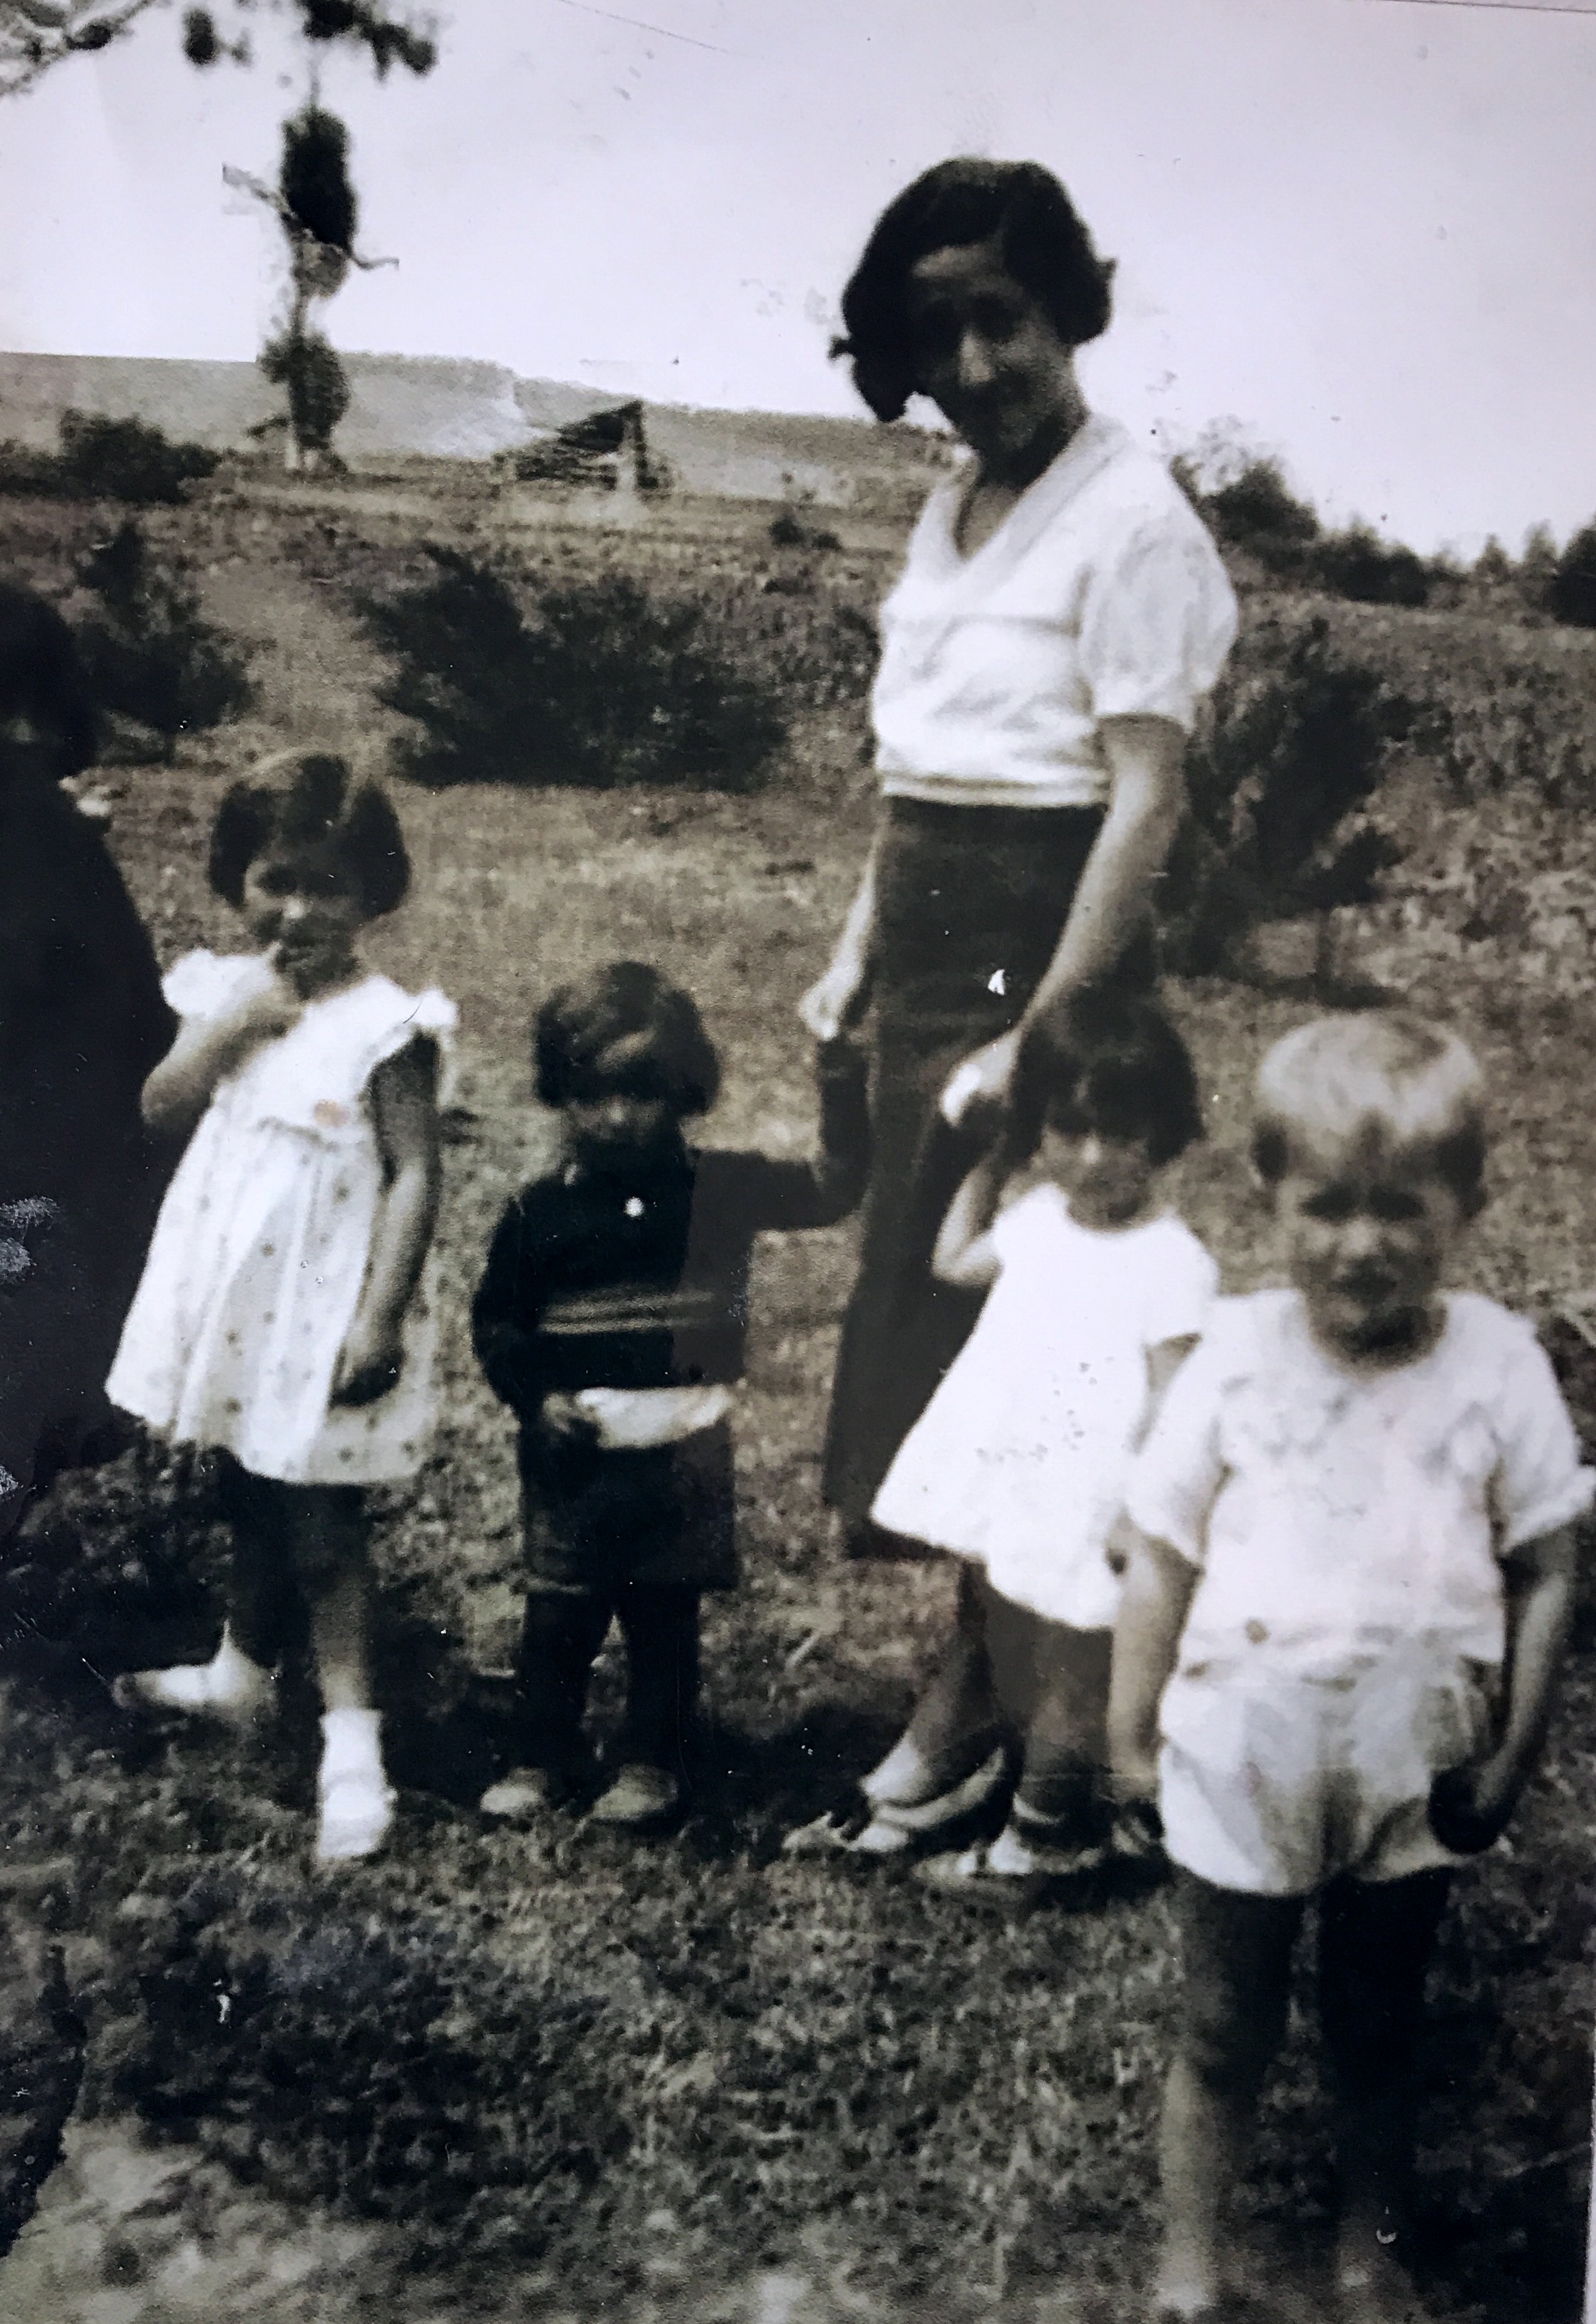 My grandparents know each other since they born. The blonde boy and the girl next to him in the year 1935